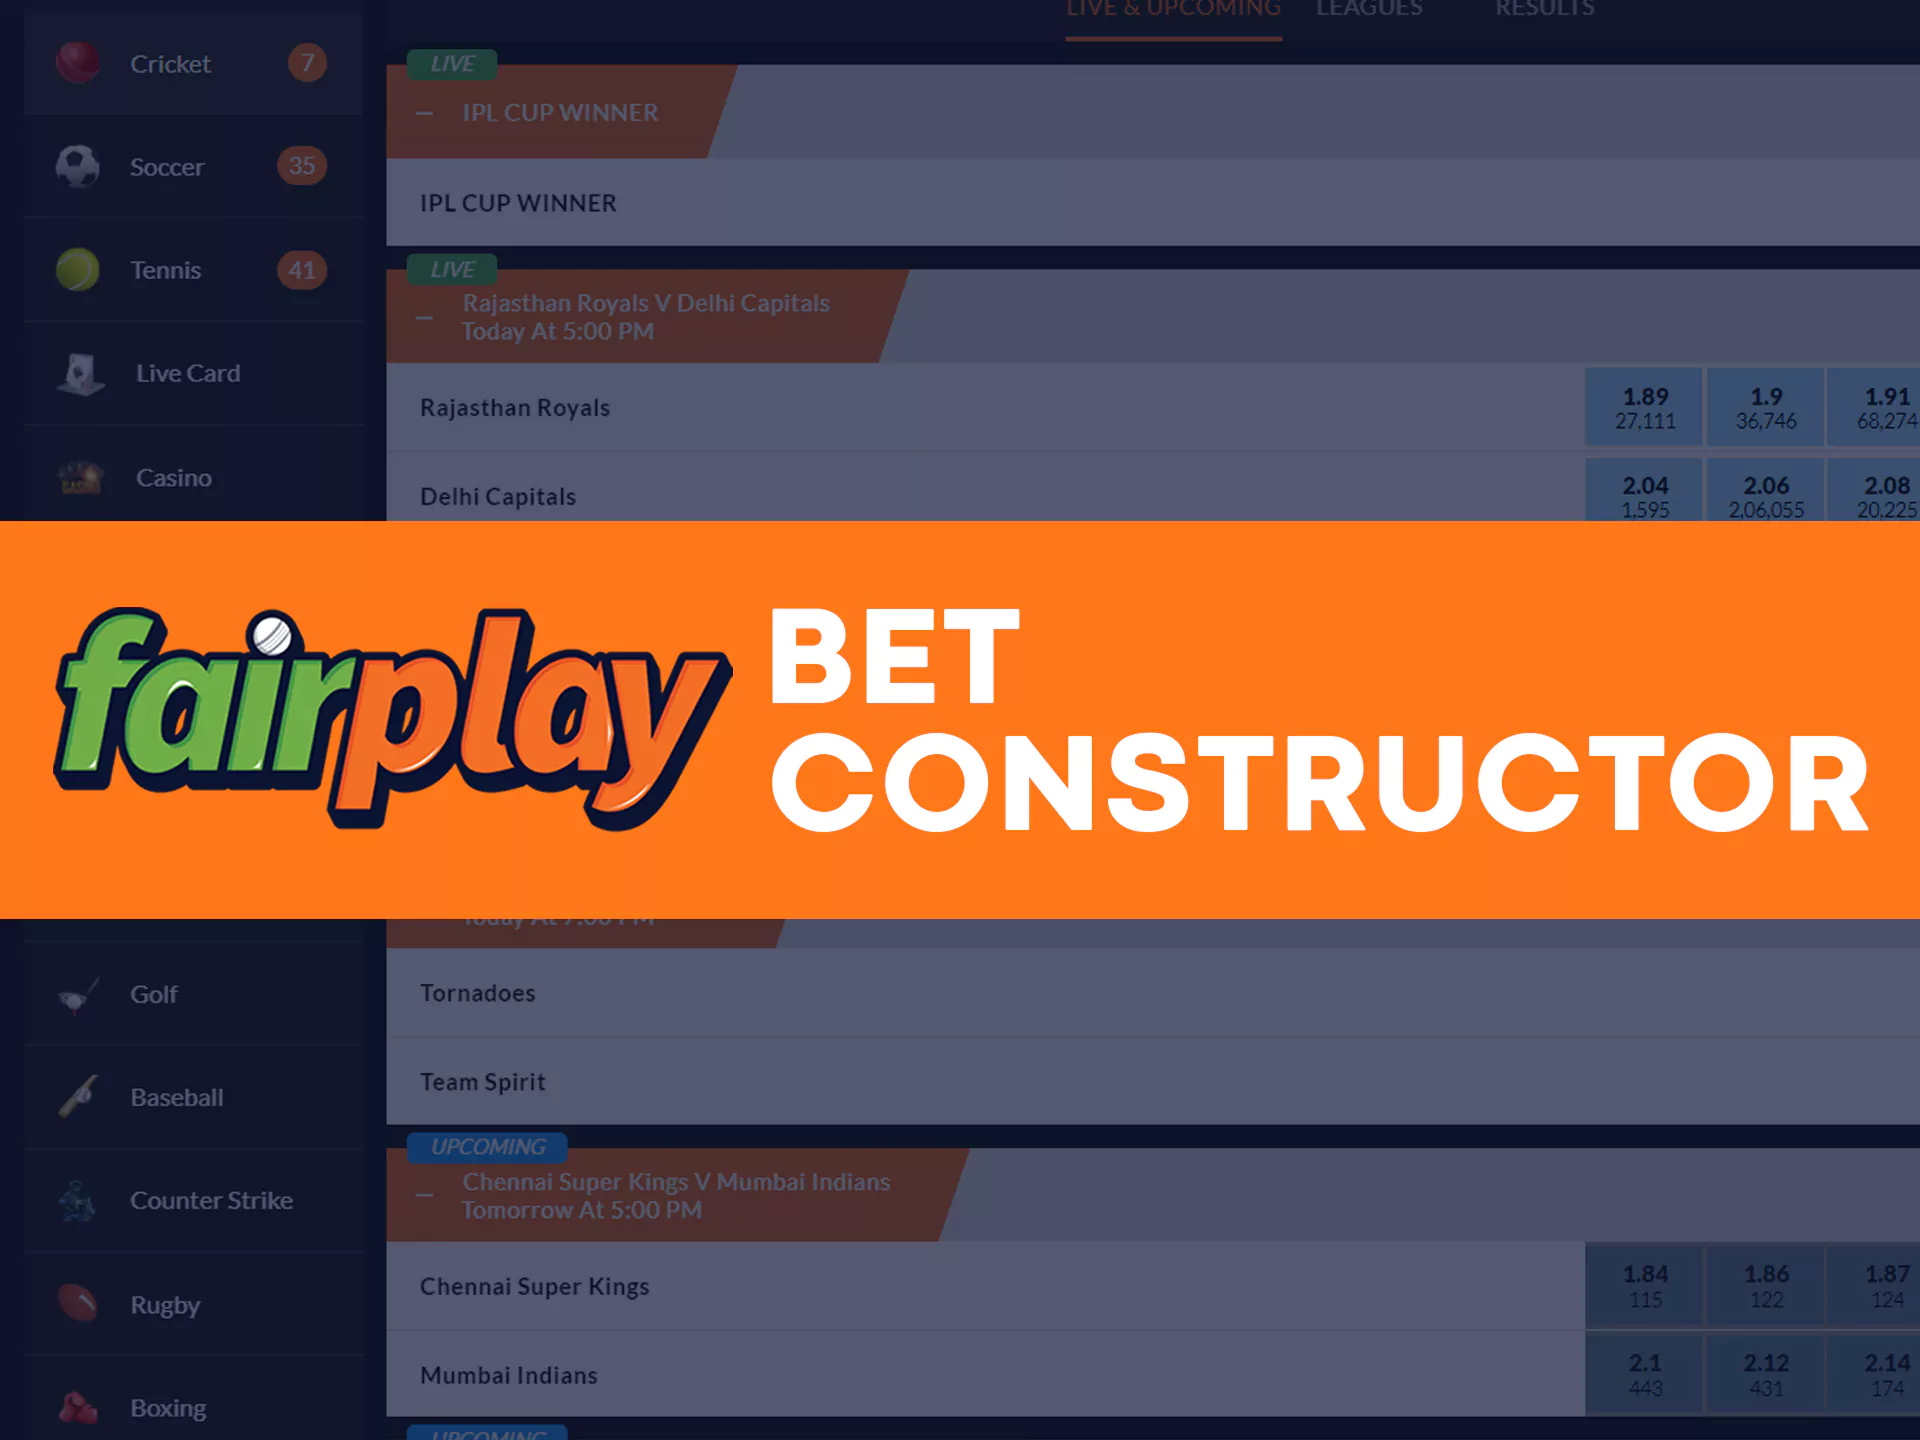 Create your own bet with bet constructor at Fairplay.